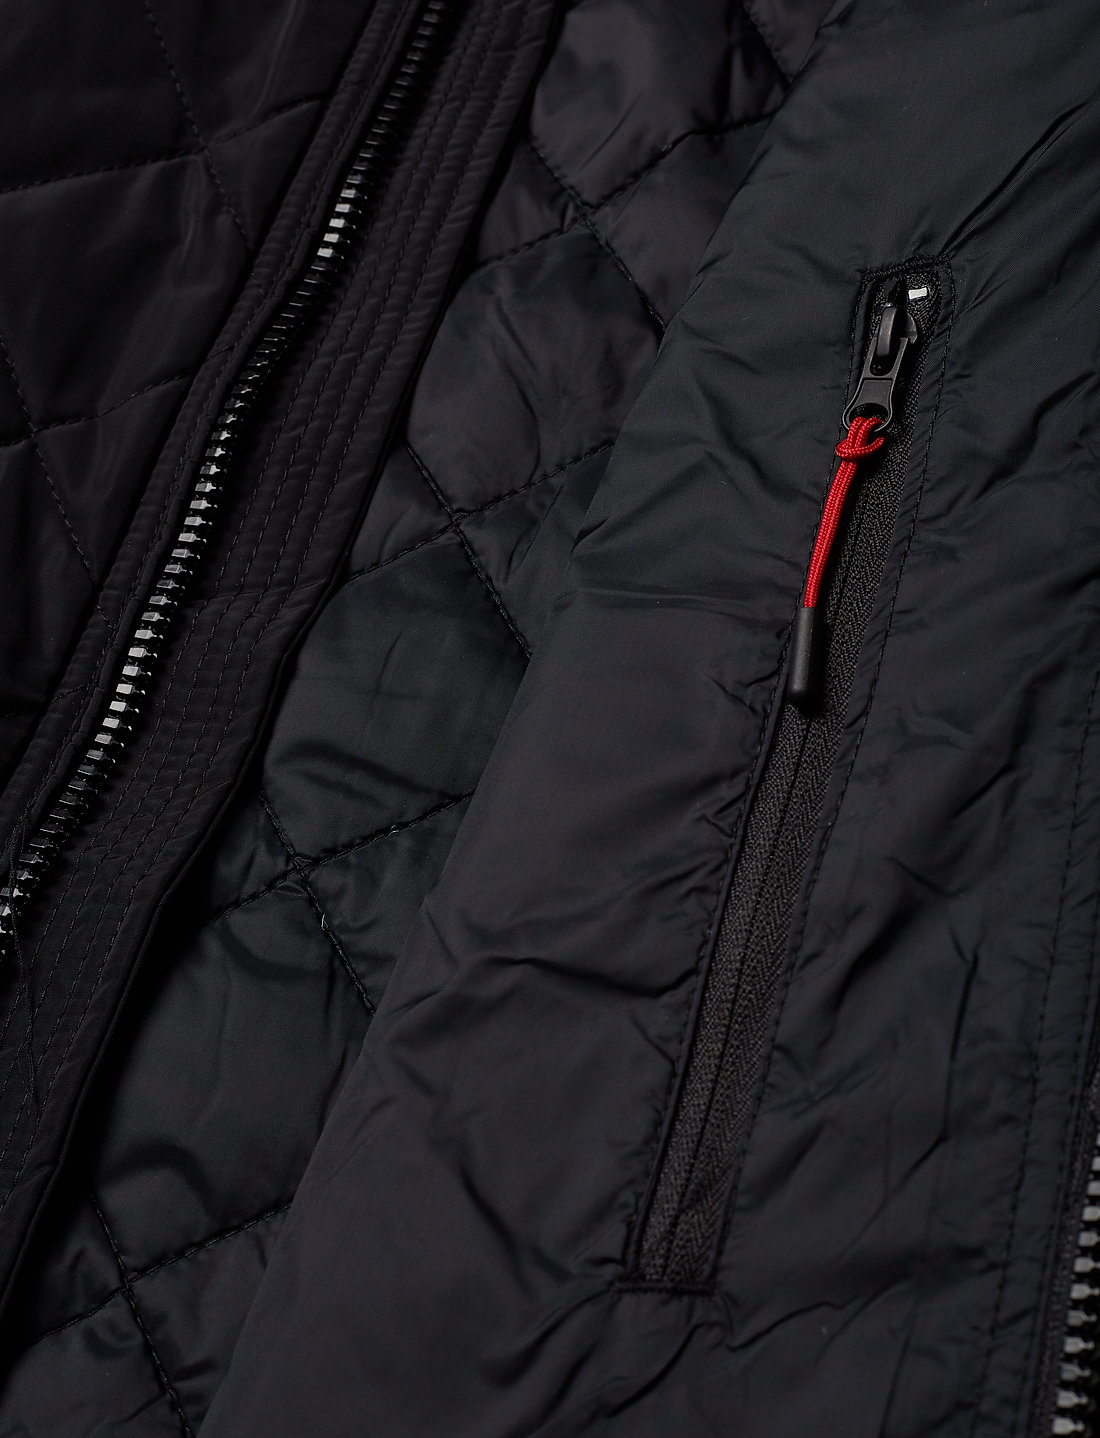 Replay Jacket - 89.94 €. Buy Quilted jackets from Replay online at  Boozt.com. Fast delivery and easy returns